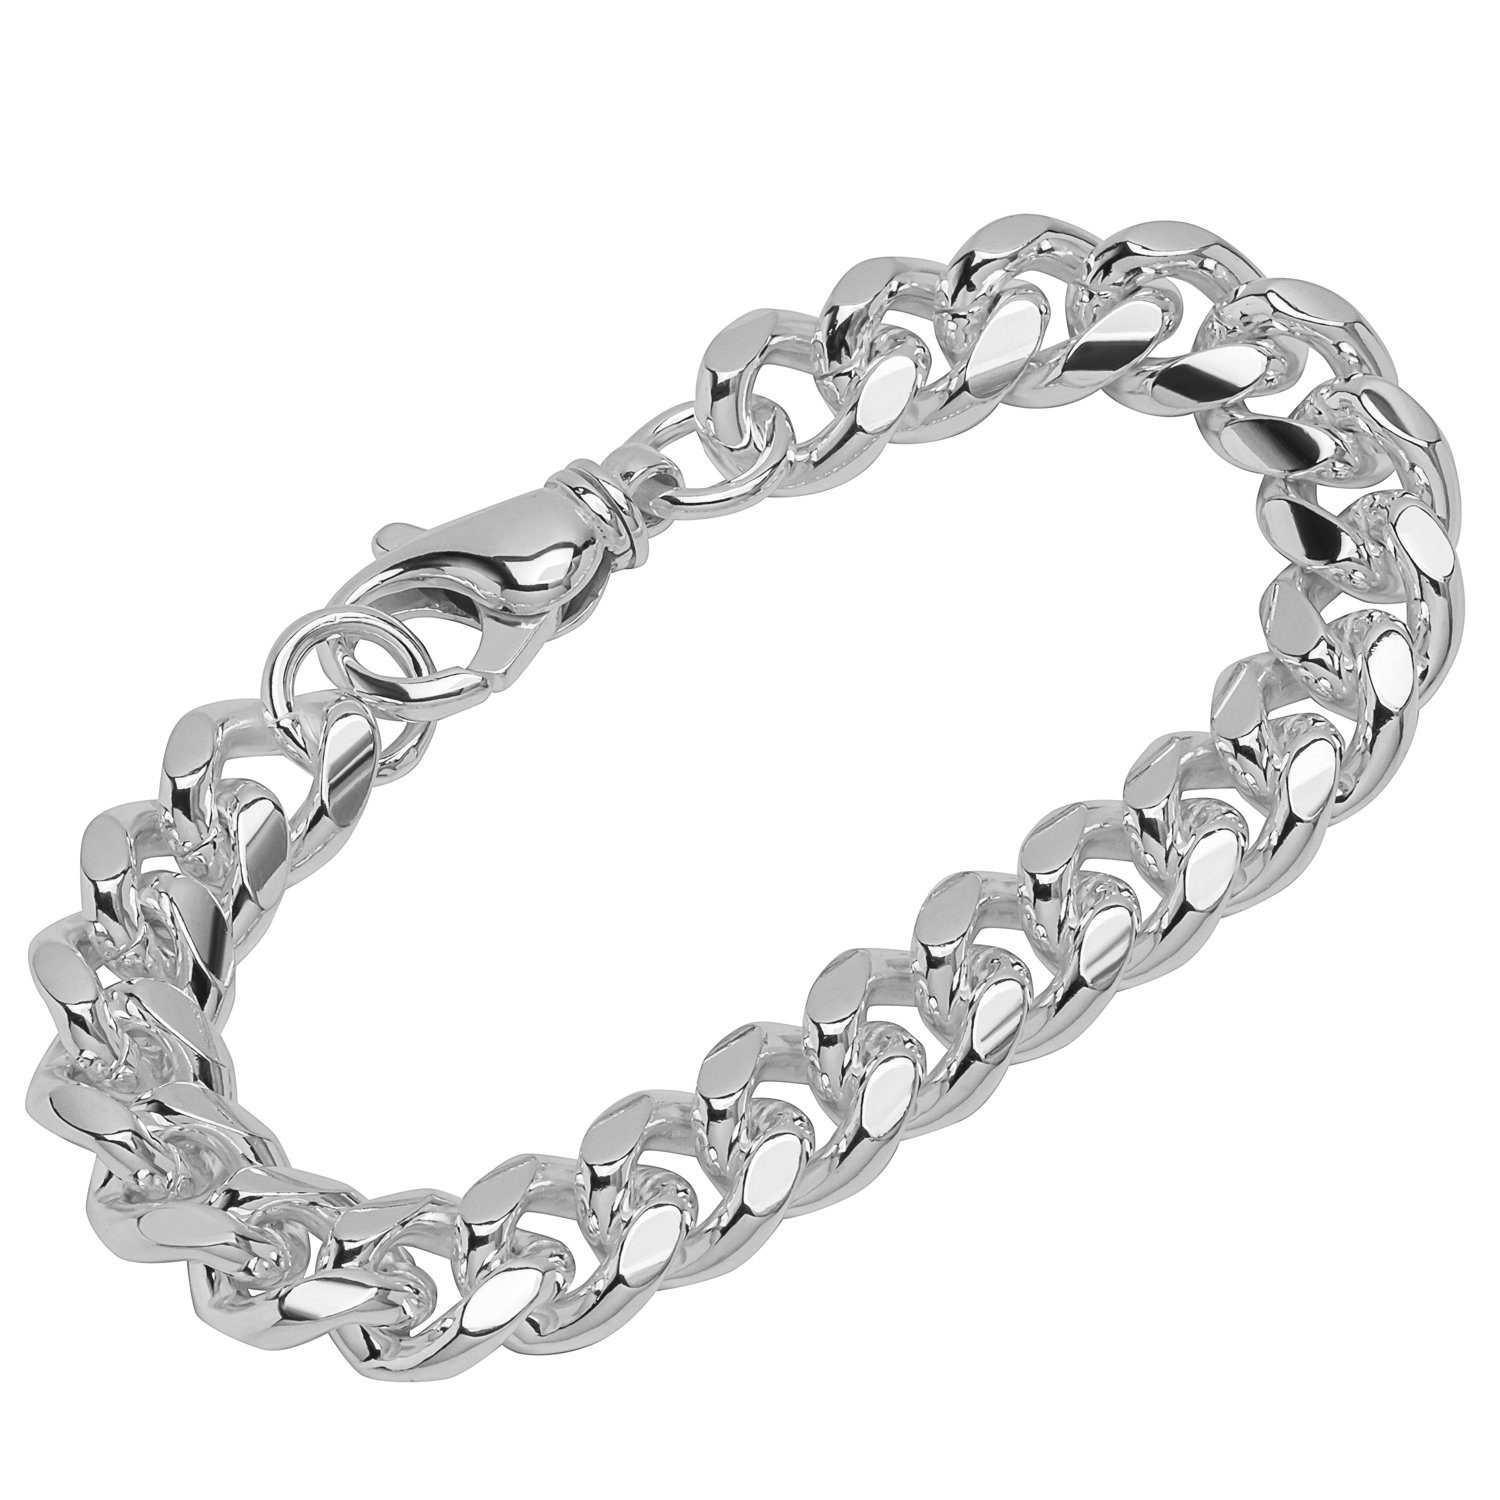 NKlaus Silberarmband Armband 925 Sterling 22cm in (1 Made Germany flach Panzerkette Stück), Silber